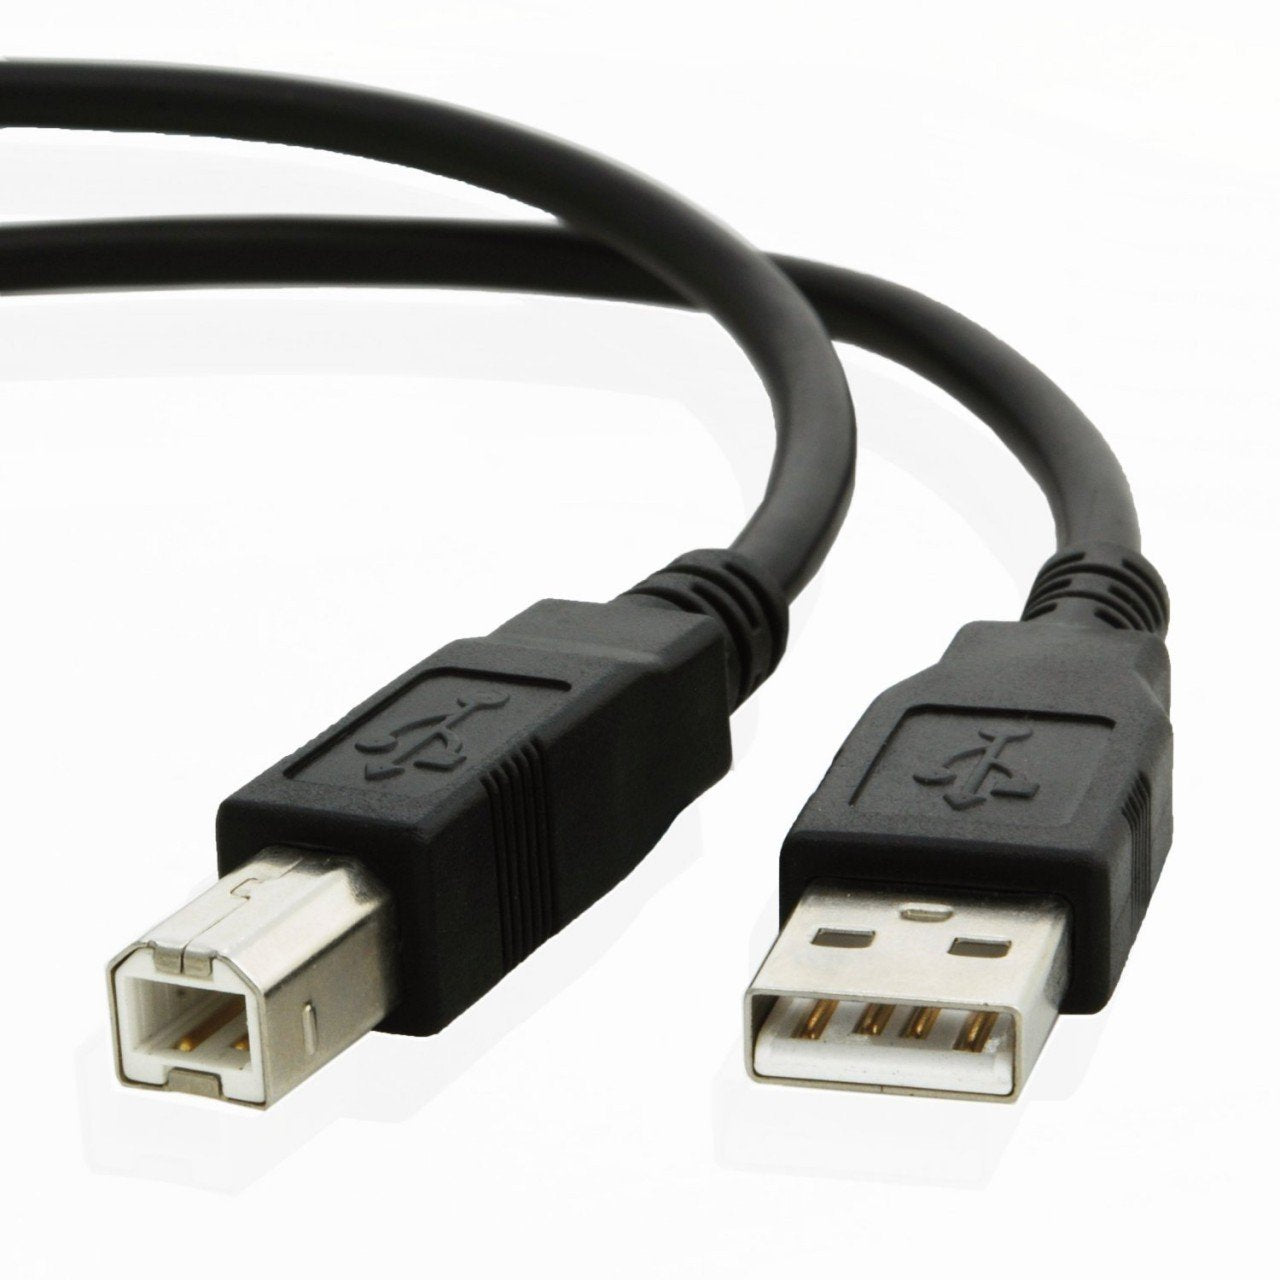 USB cable for Cad Audio U39